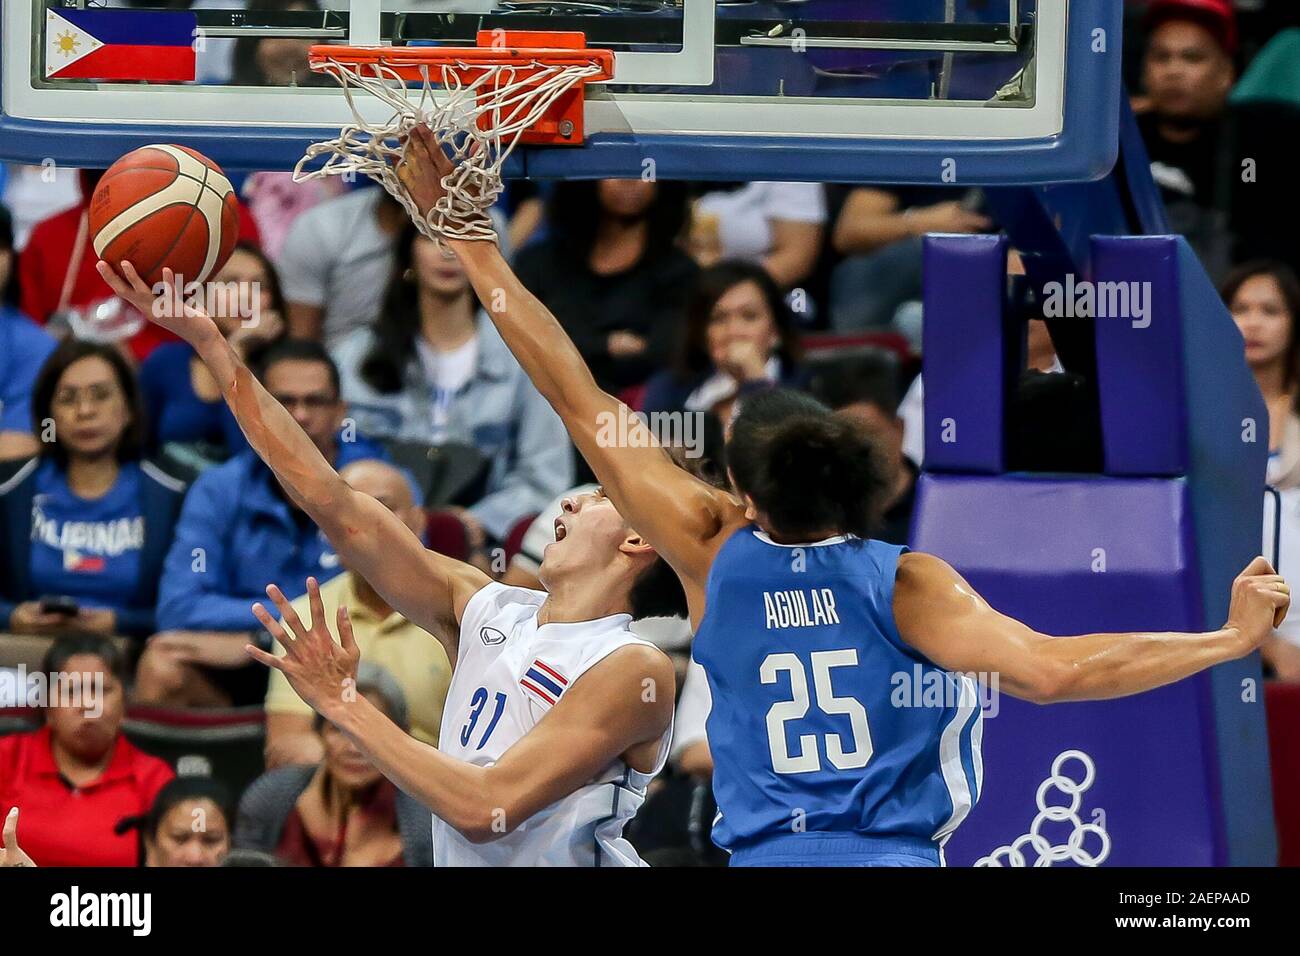 Pasay City, Philippines. 10th Dec, 2019. Chanatip Jakrawan (L) of Thailand competes against Japeth Paul Aguilar (R) of the Philippines during the gold medal match of men's basketball between the Philippines and Thailand at the Southeast Asian Games 2019 in Pasay City, the Philippines, Dec. 10, 2019. Credit: Rouelle Umali/Xinhua/Alamy Live News Stock Photo